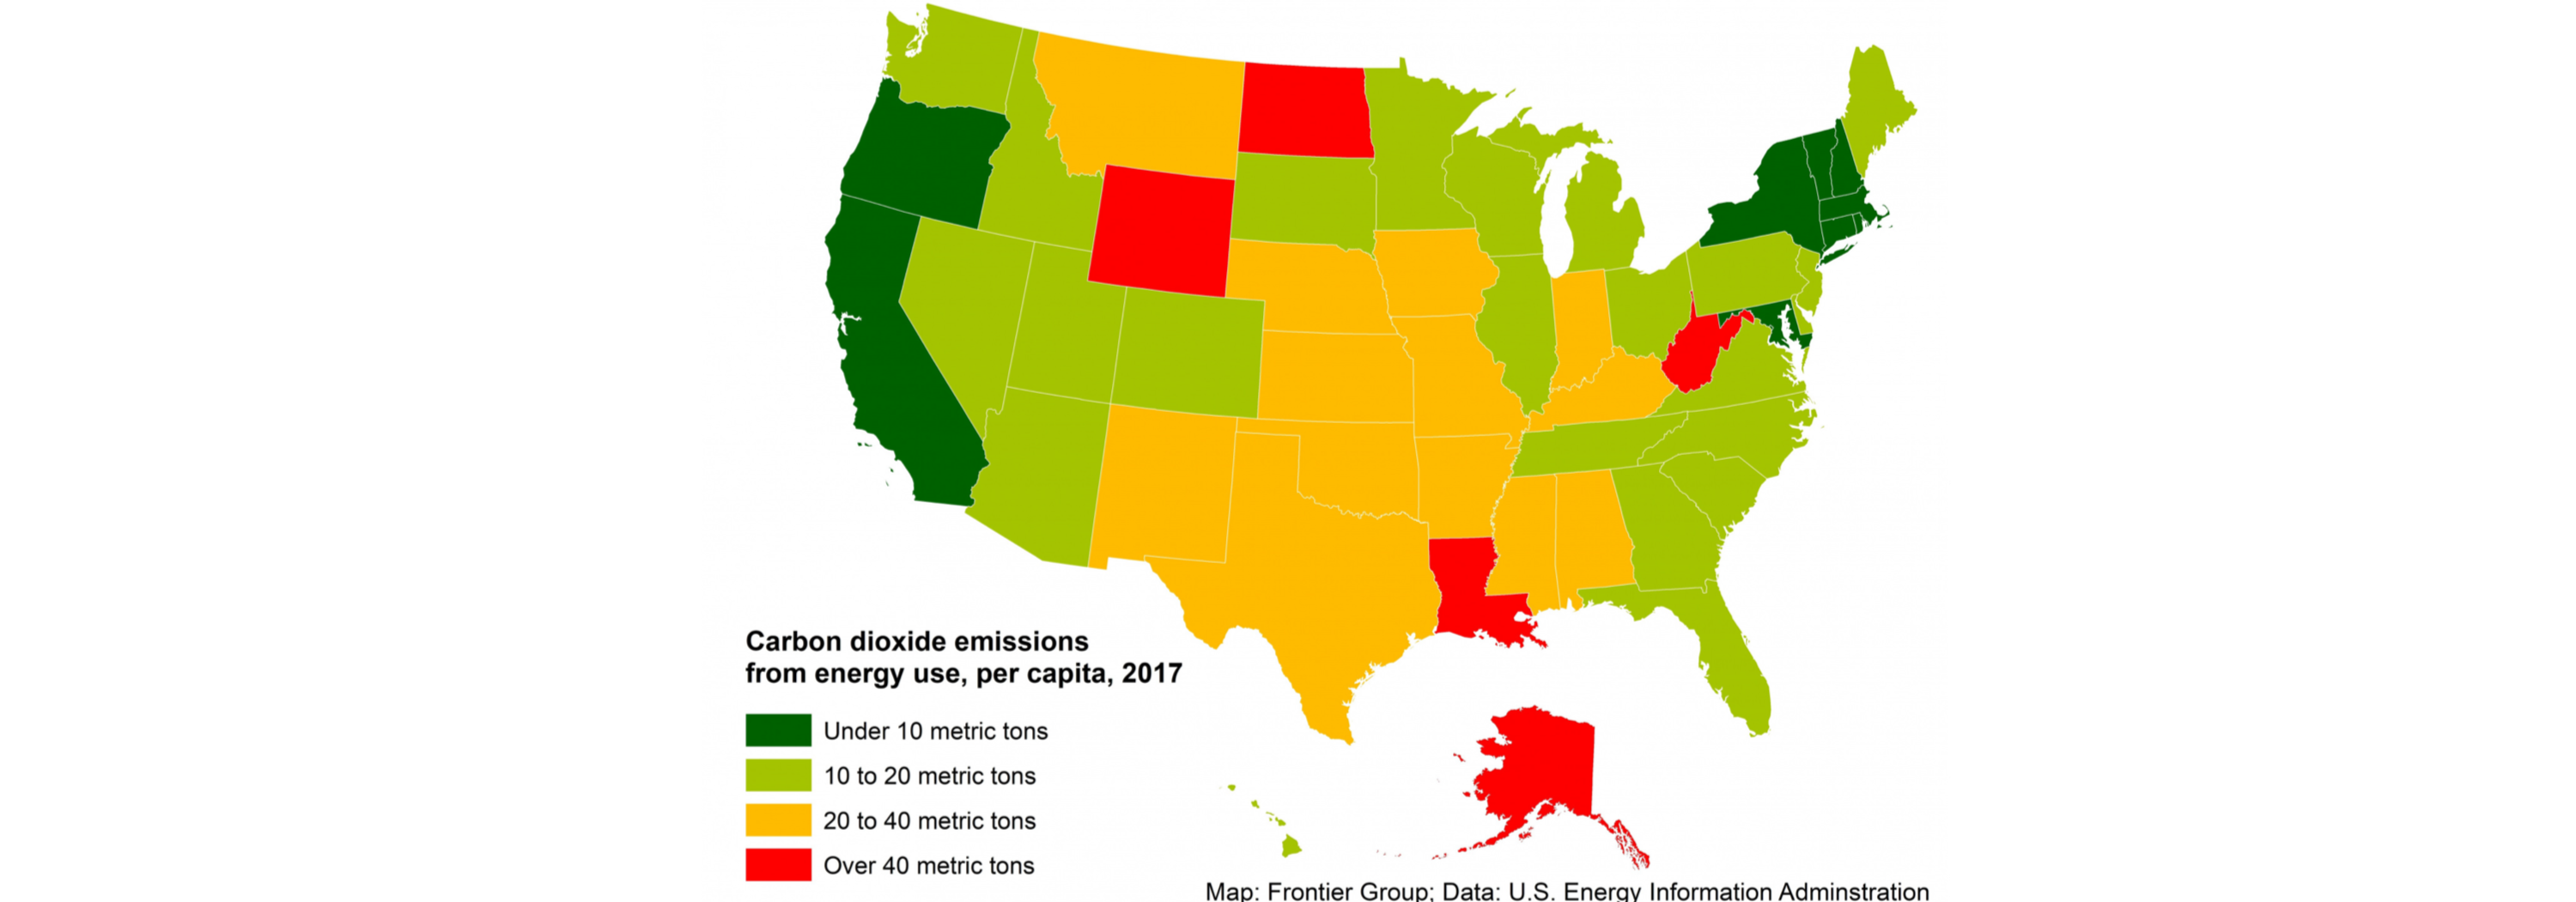 A map of carbon dioxide emissions per capita by state in the U.S. in 2017